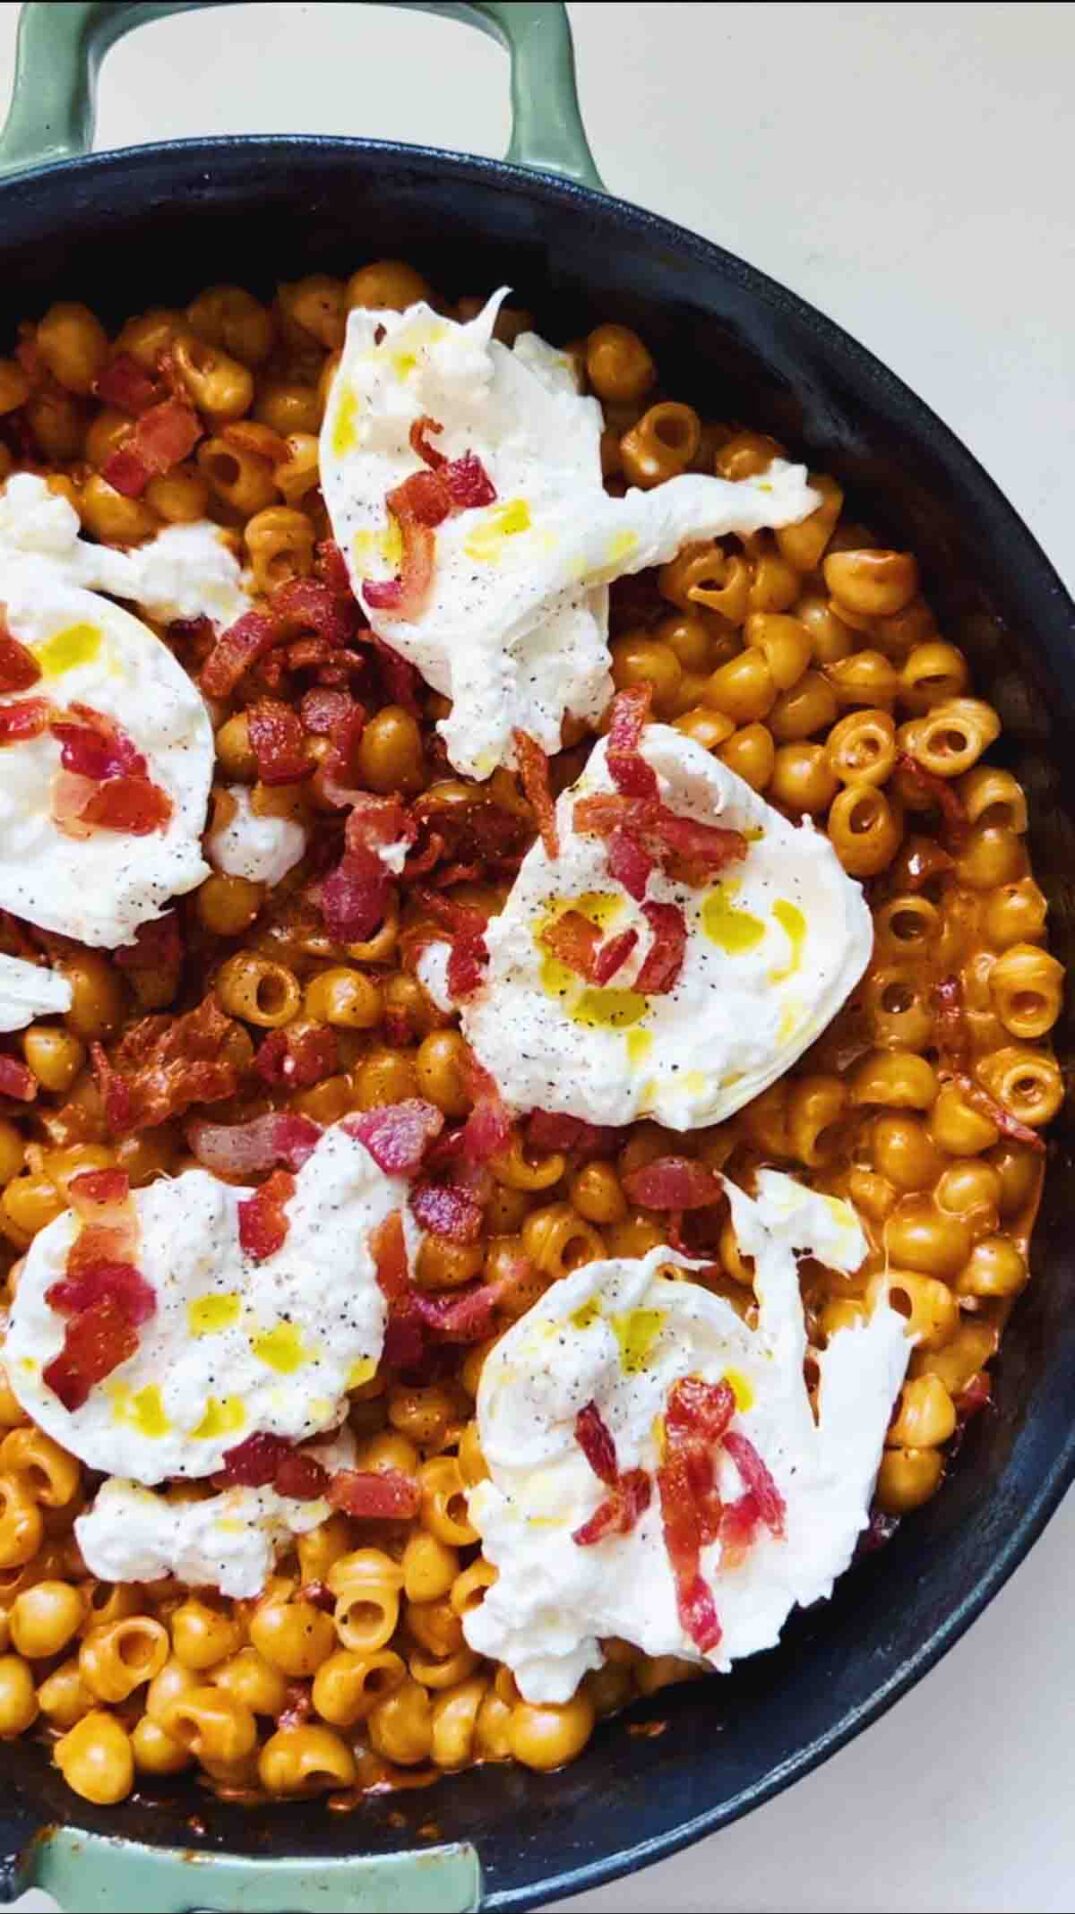 spicy vodka pasta, burrata, and bacon in a skillet on a white surface.